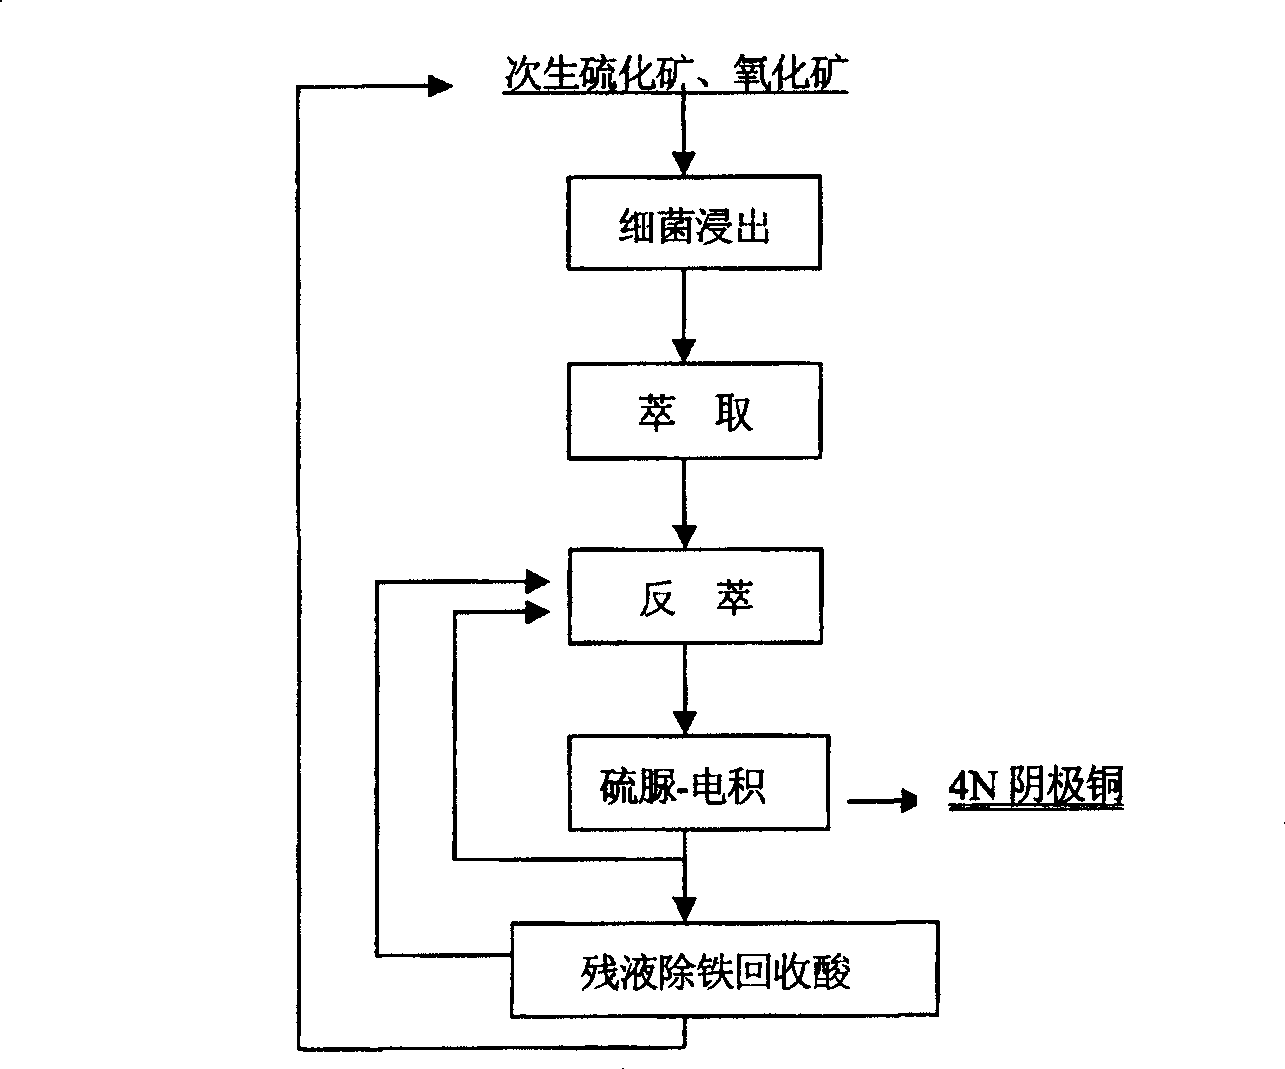 Method of preparing high purity copper by bacteria of primary leaching sulfide ore